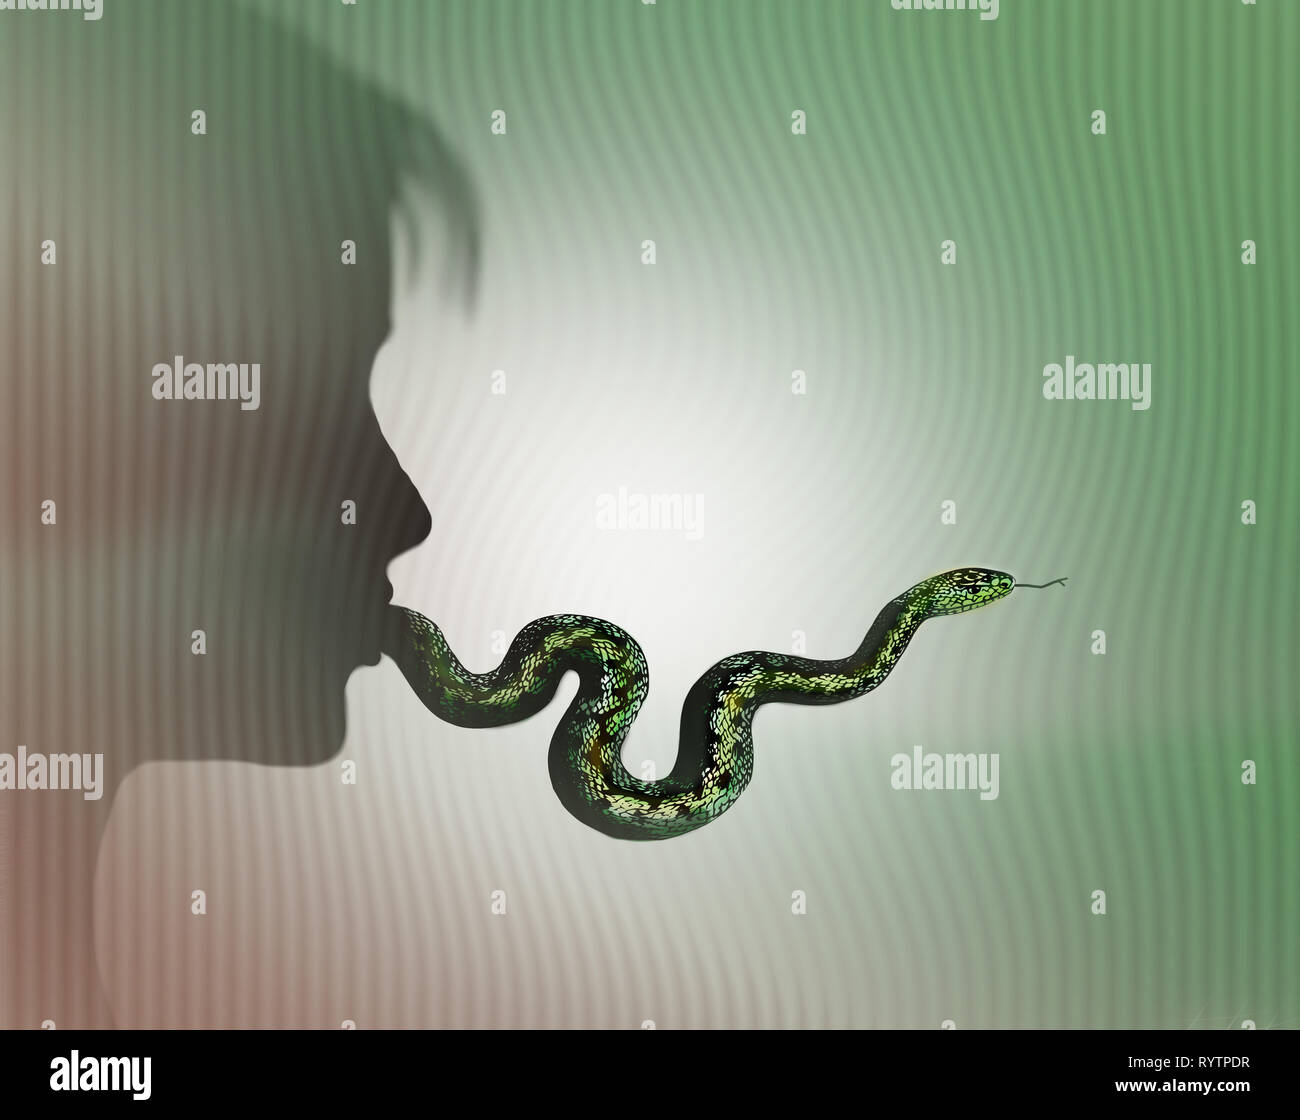 Concept image of a young woman's profile with a snake as a tongue depicting harsh speech or lies Stock Photo